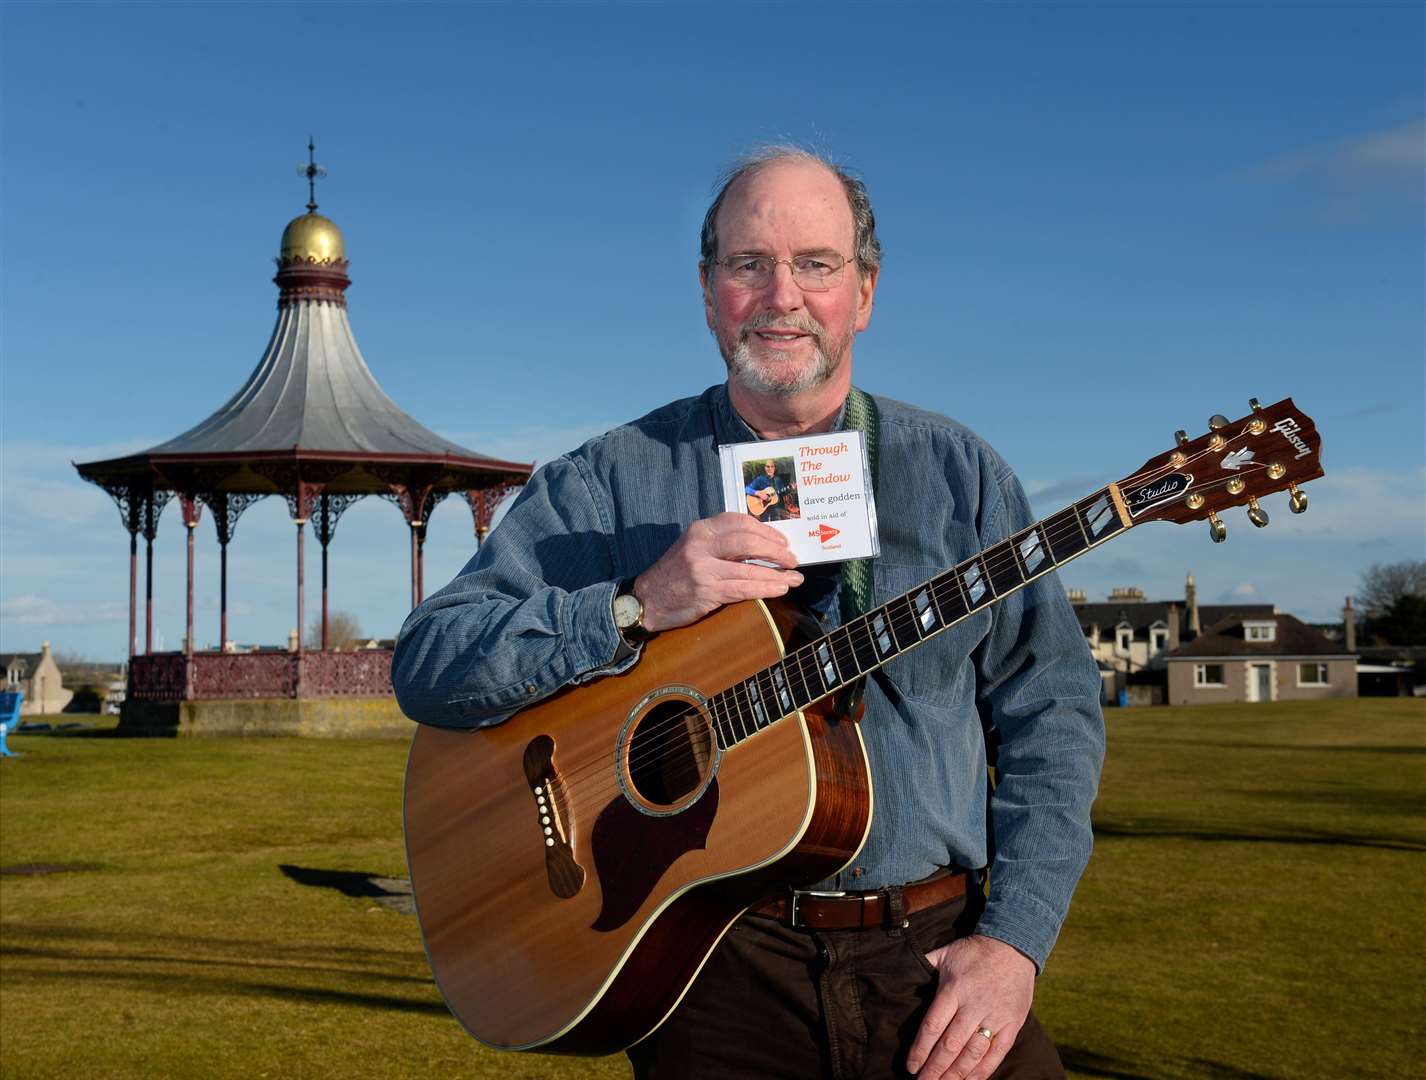 Nairn musician and songwriter Dave Godden with new CD, Through the Window. Picture: Gary Anthony.